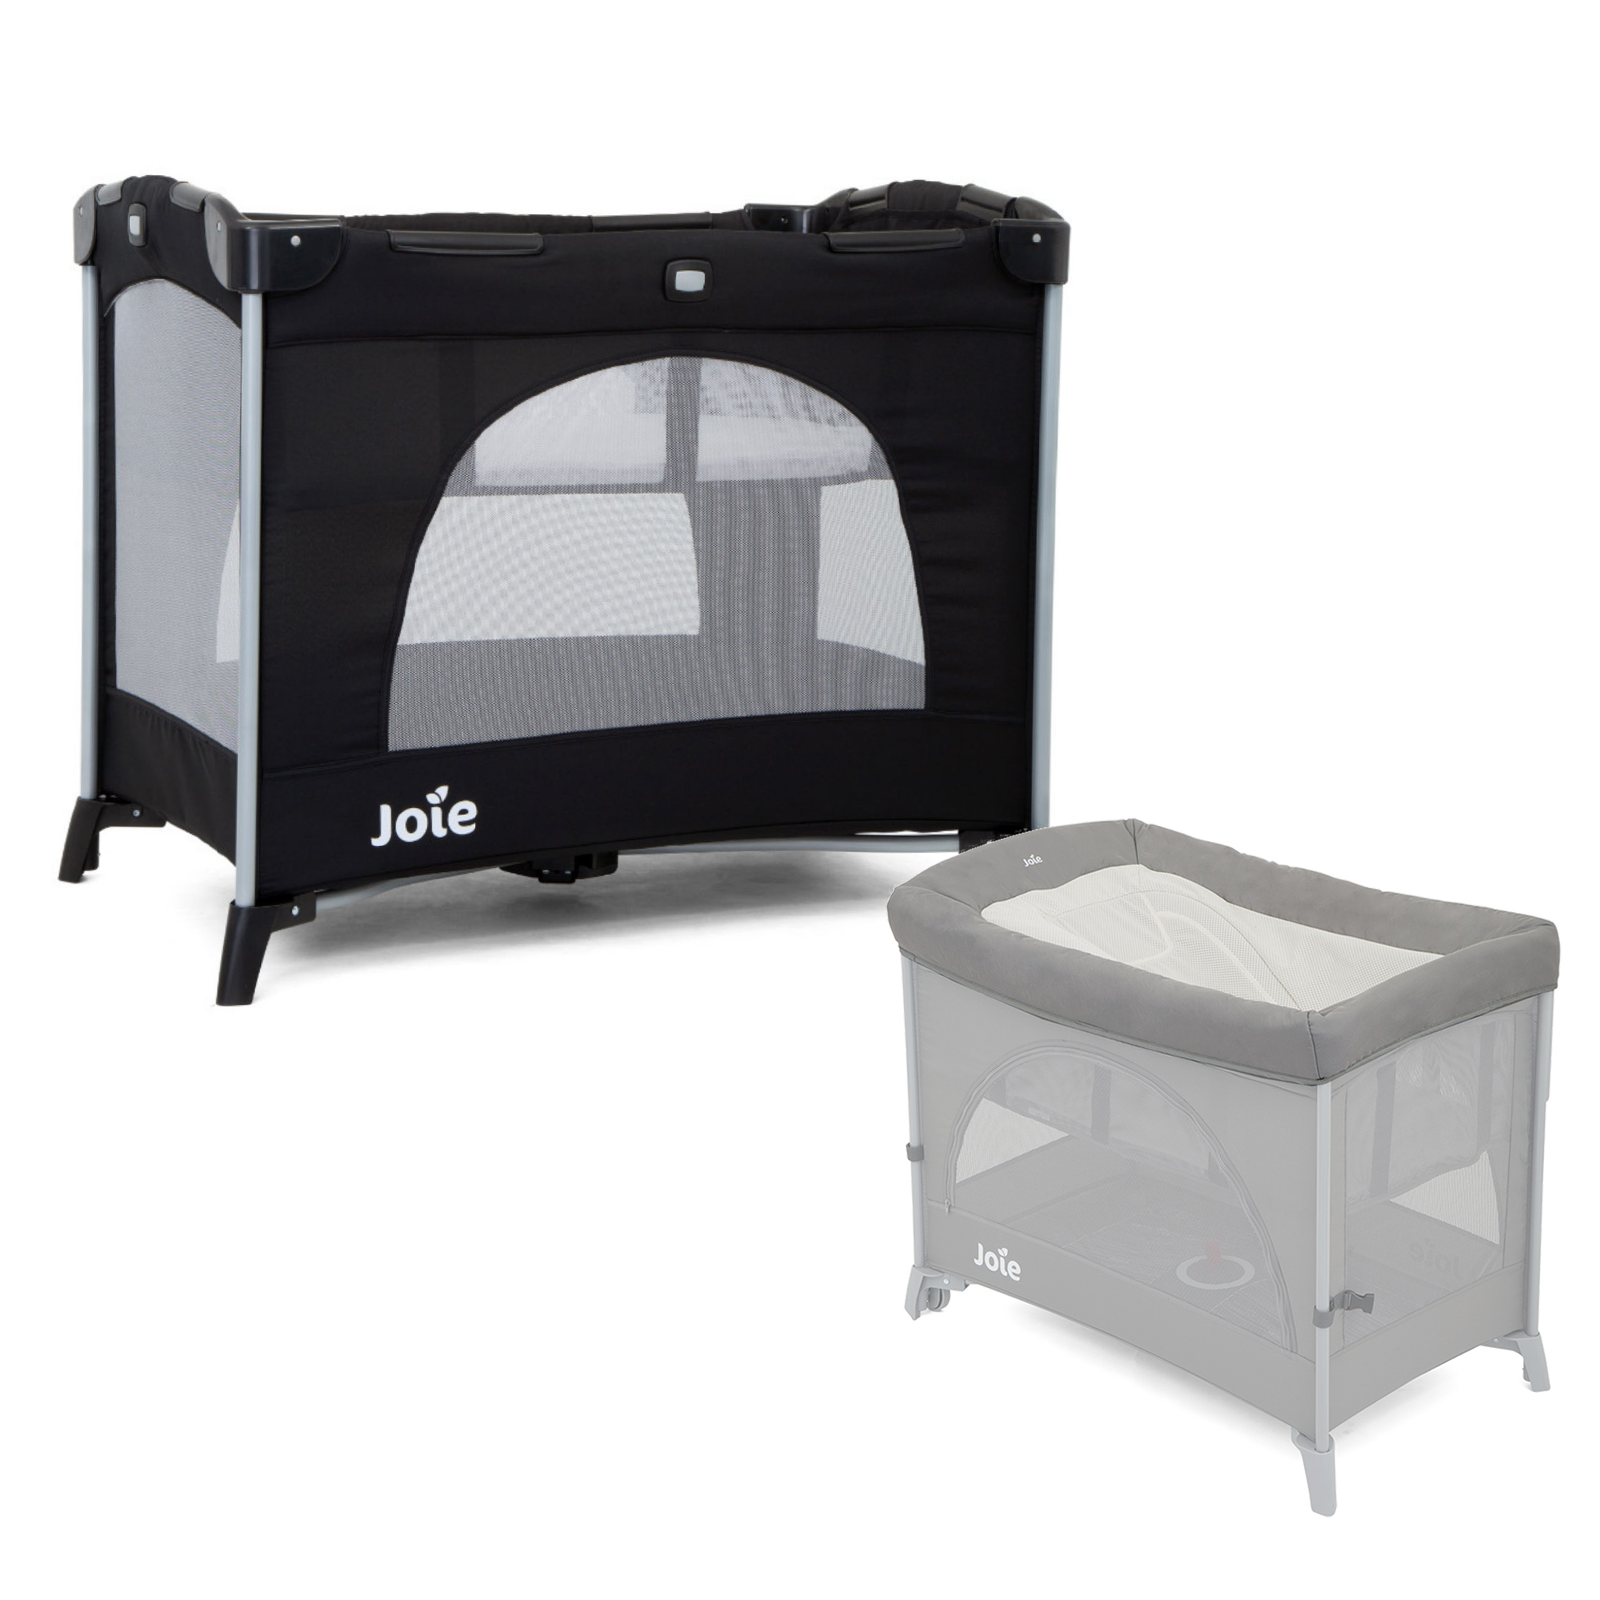 Joie Kubbie 3in1 Bassinet Travel Cot with Daydreamer Accessory Topper